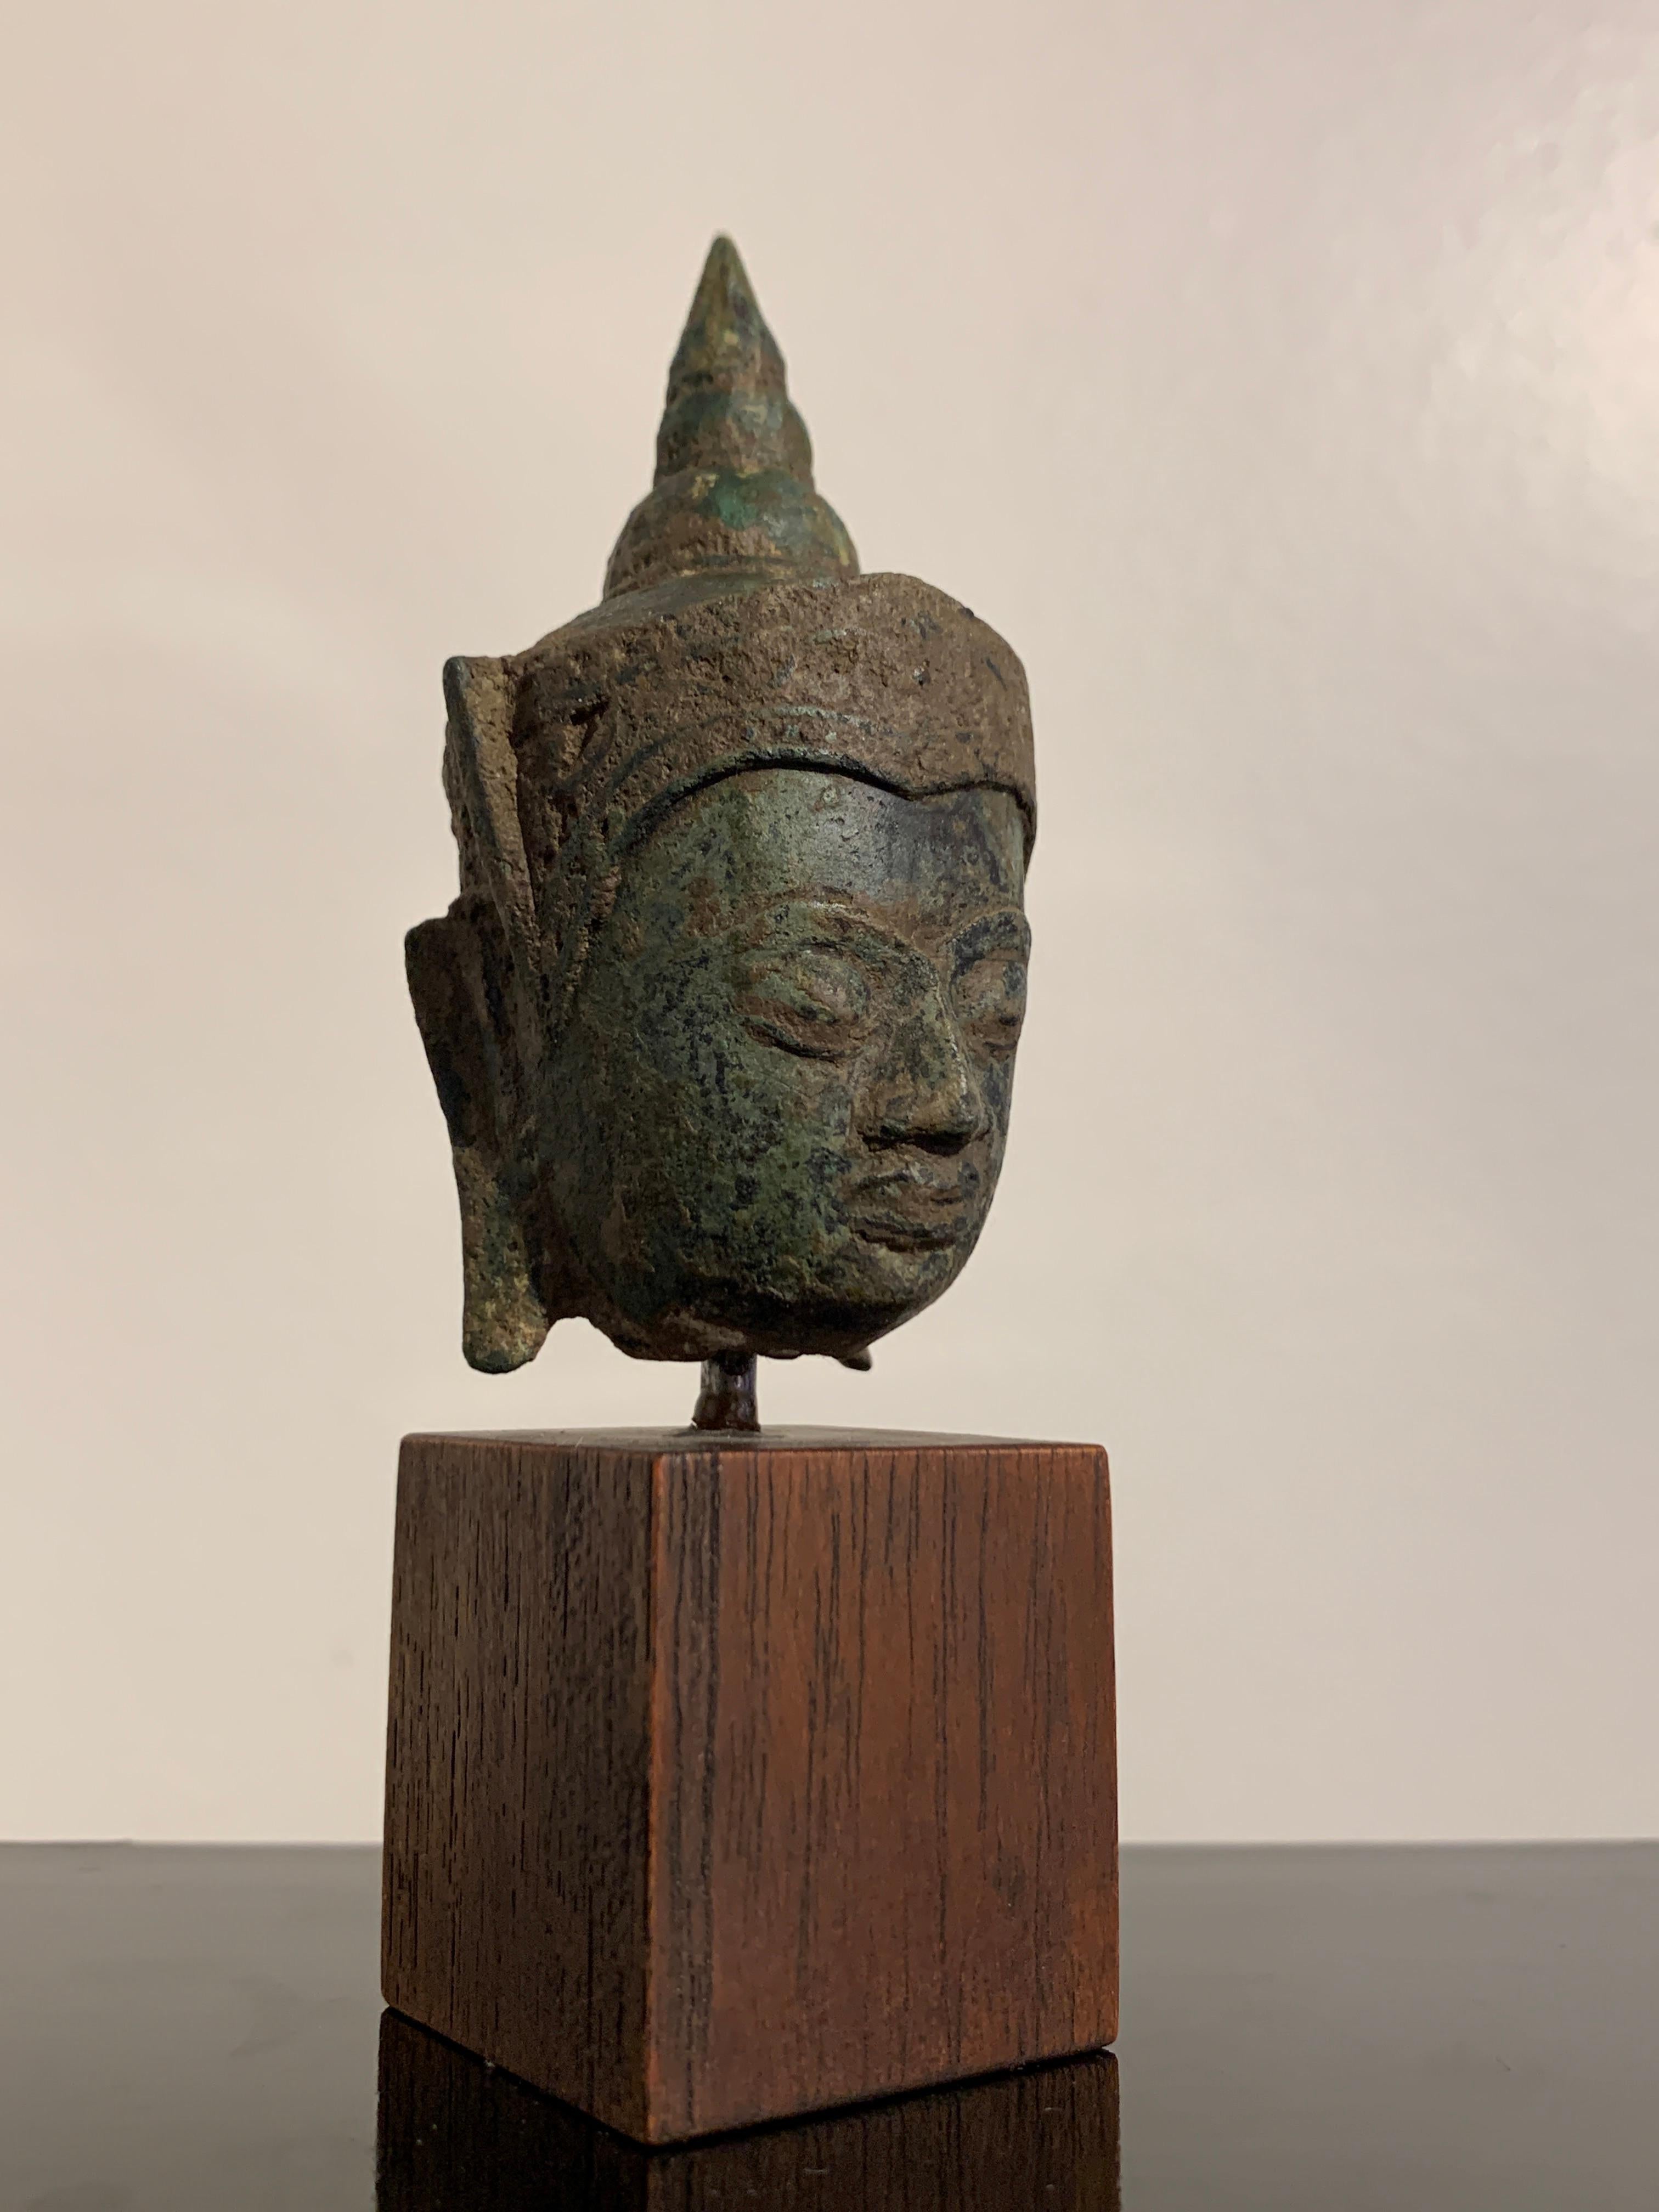 A small cast bronze crowned head of the Buddha with heavy patina, Ayutthaya Kingdom, 17th century, Thailand. 

The full face of the Buddha features heavily lidded downcast eyes, a wide nose, and full lips turned up in a slight smile. Long pendant